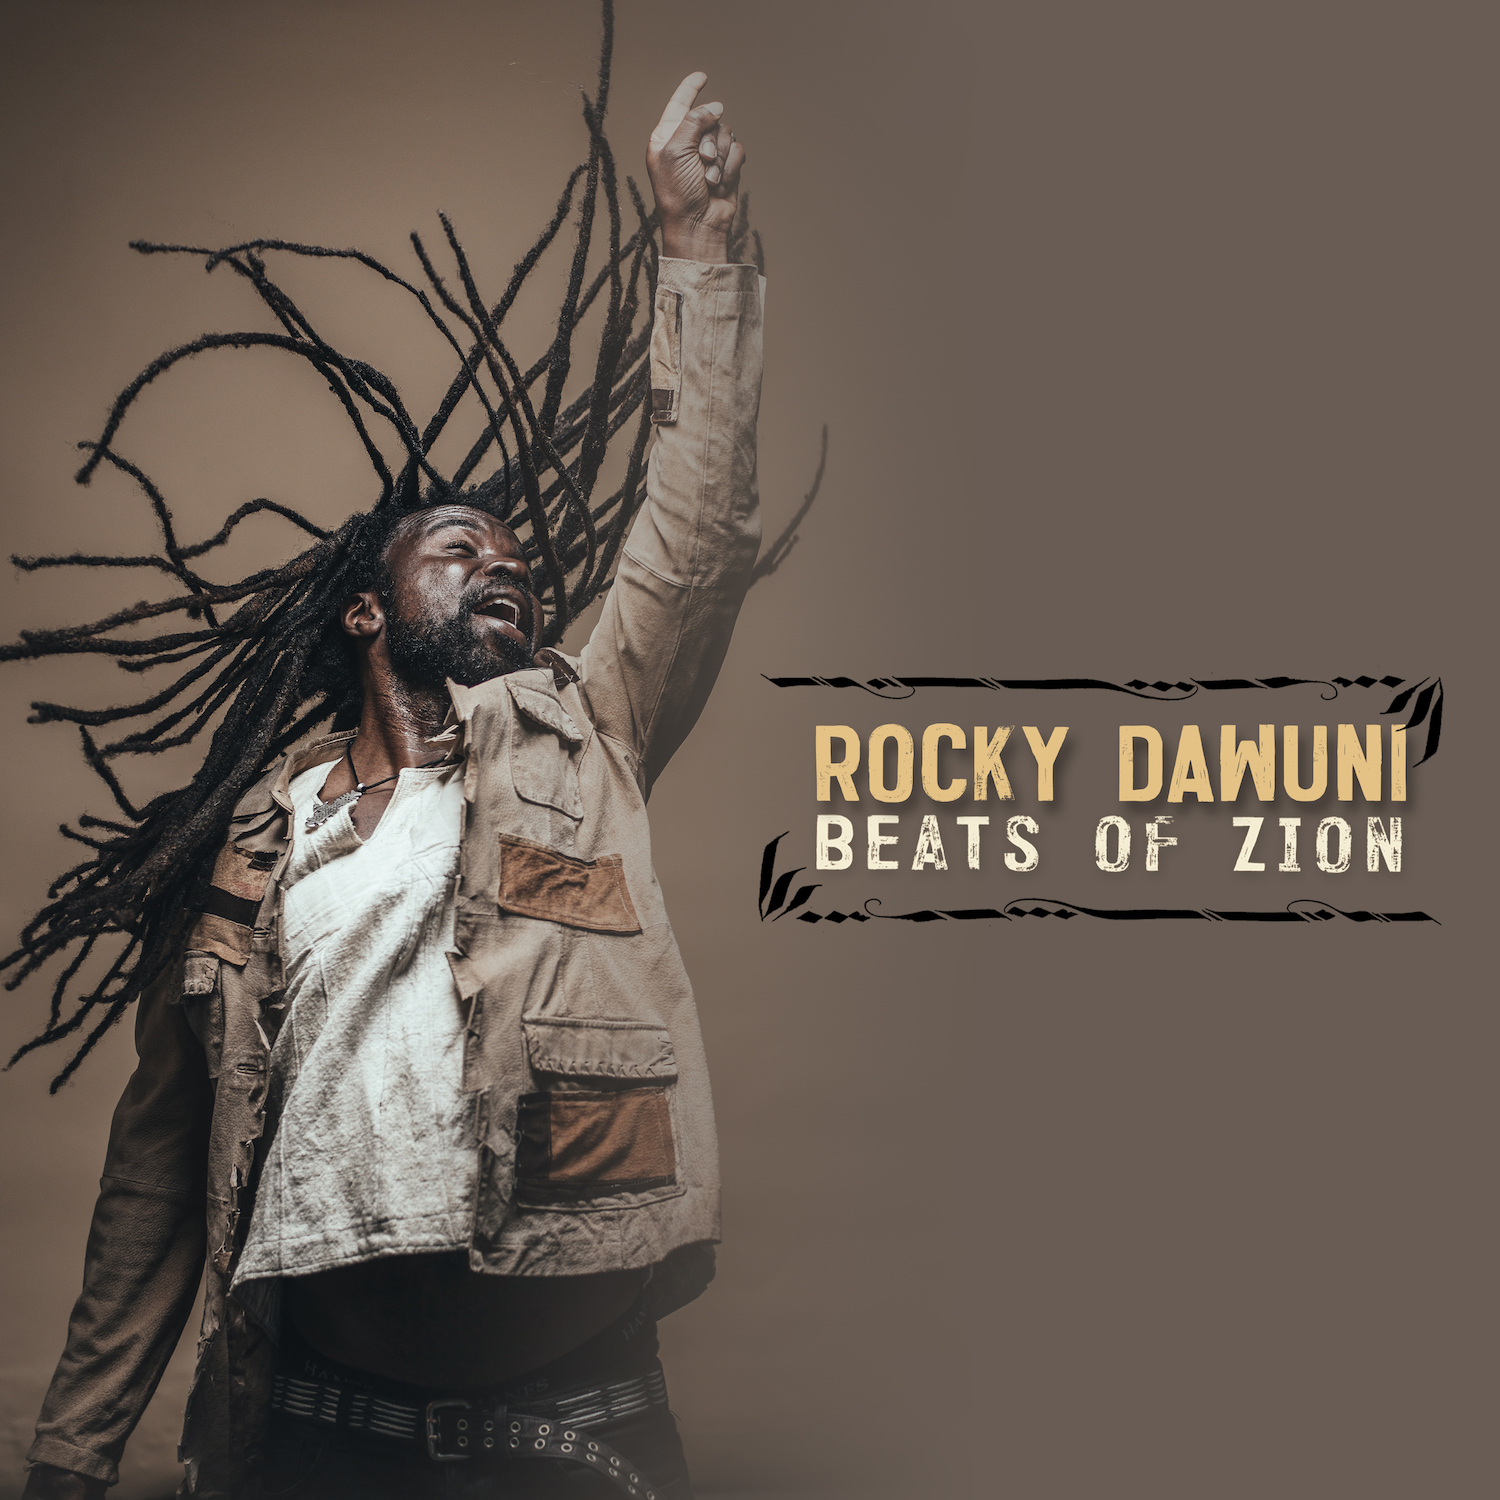 Beats of Zion: Rocky Dawuni drops visuals for First Single off his Upcoming Album